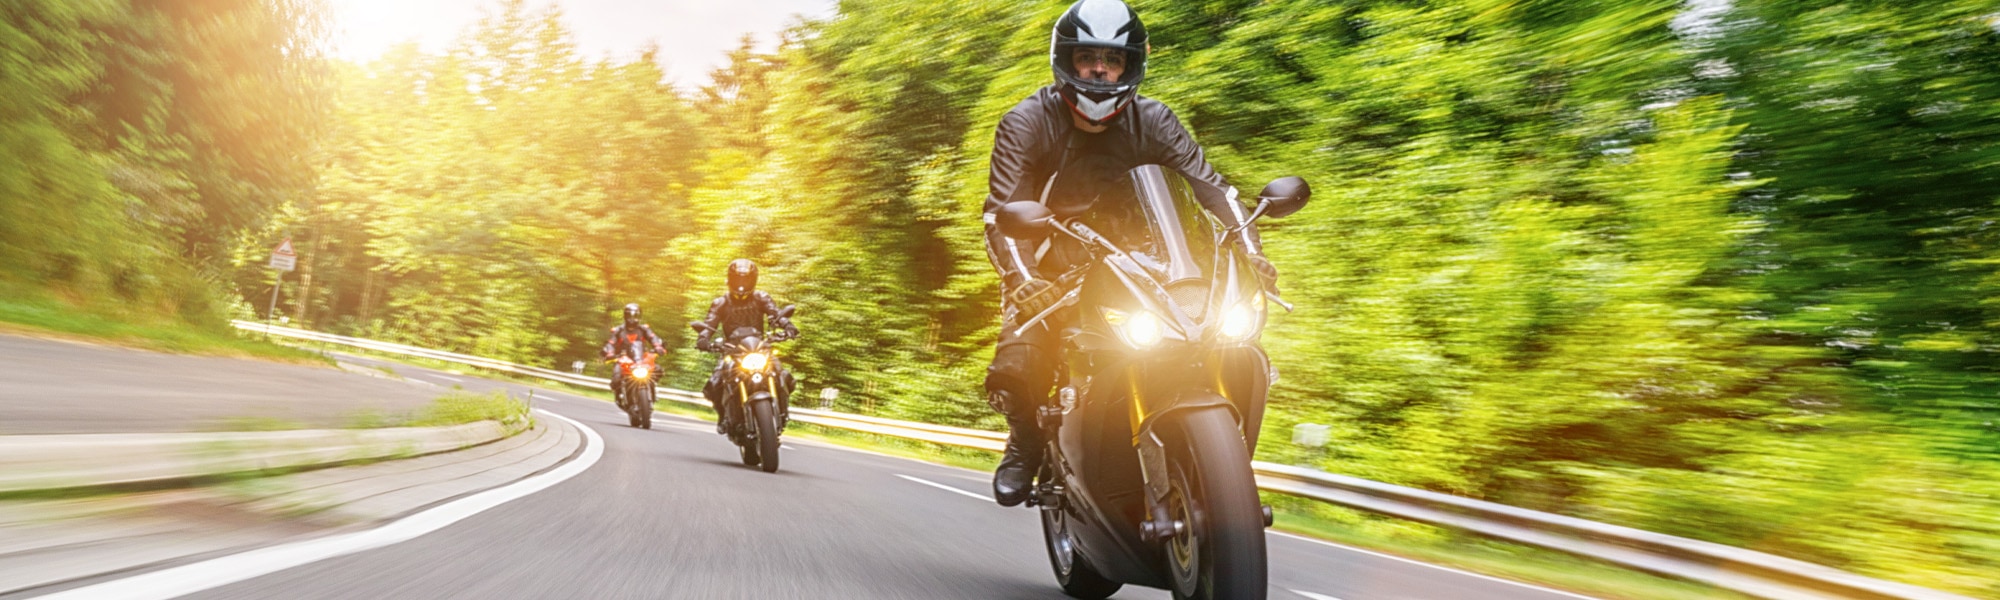 Enjoy the open road: Tips to avoid common motorcycling pitfalls  